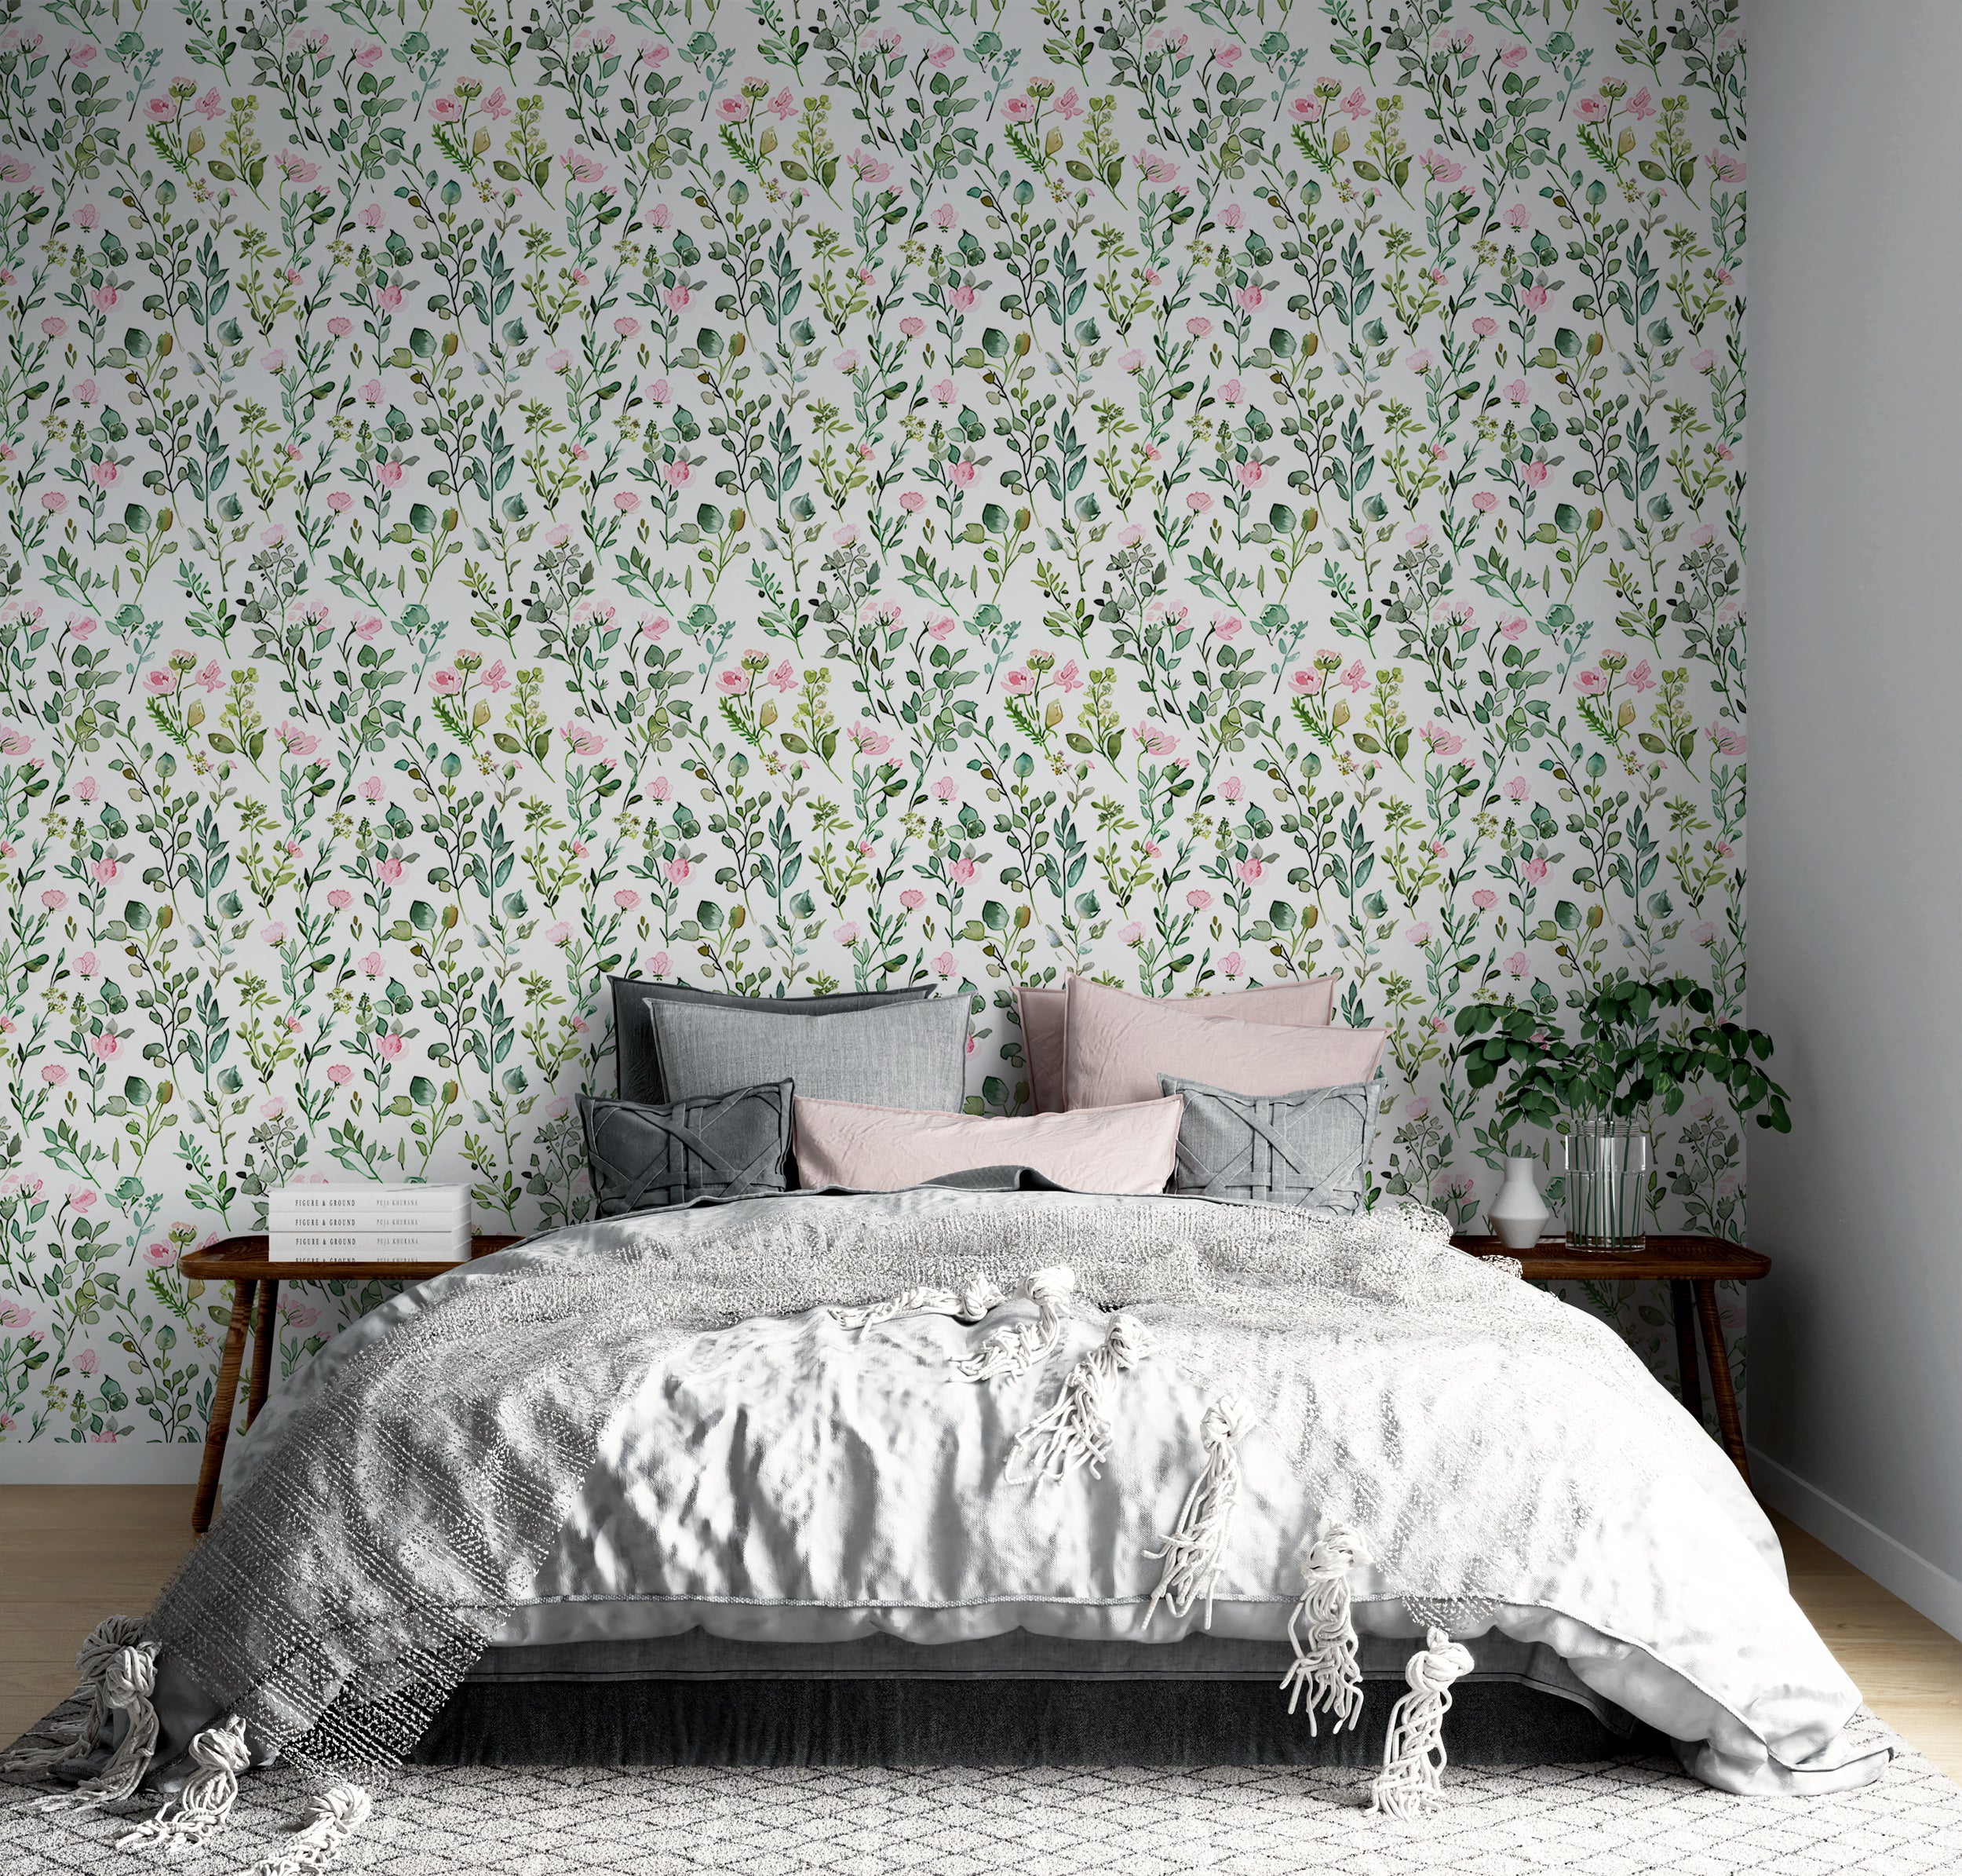 Meadow Flowers Wall Decal, Soft Botanical Peel and Stick Art